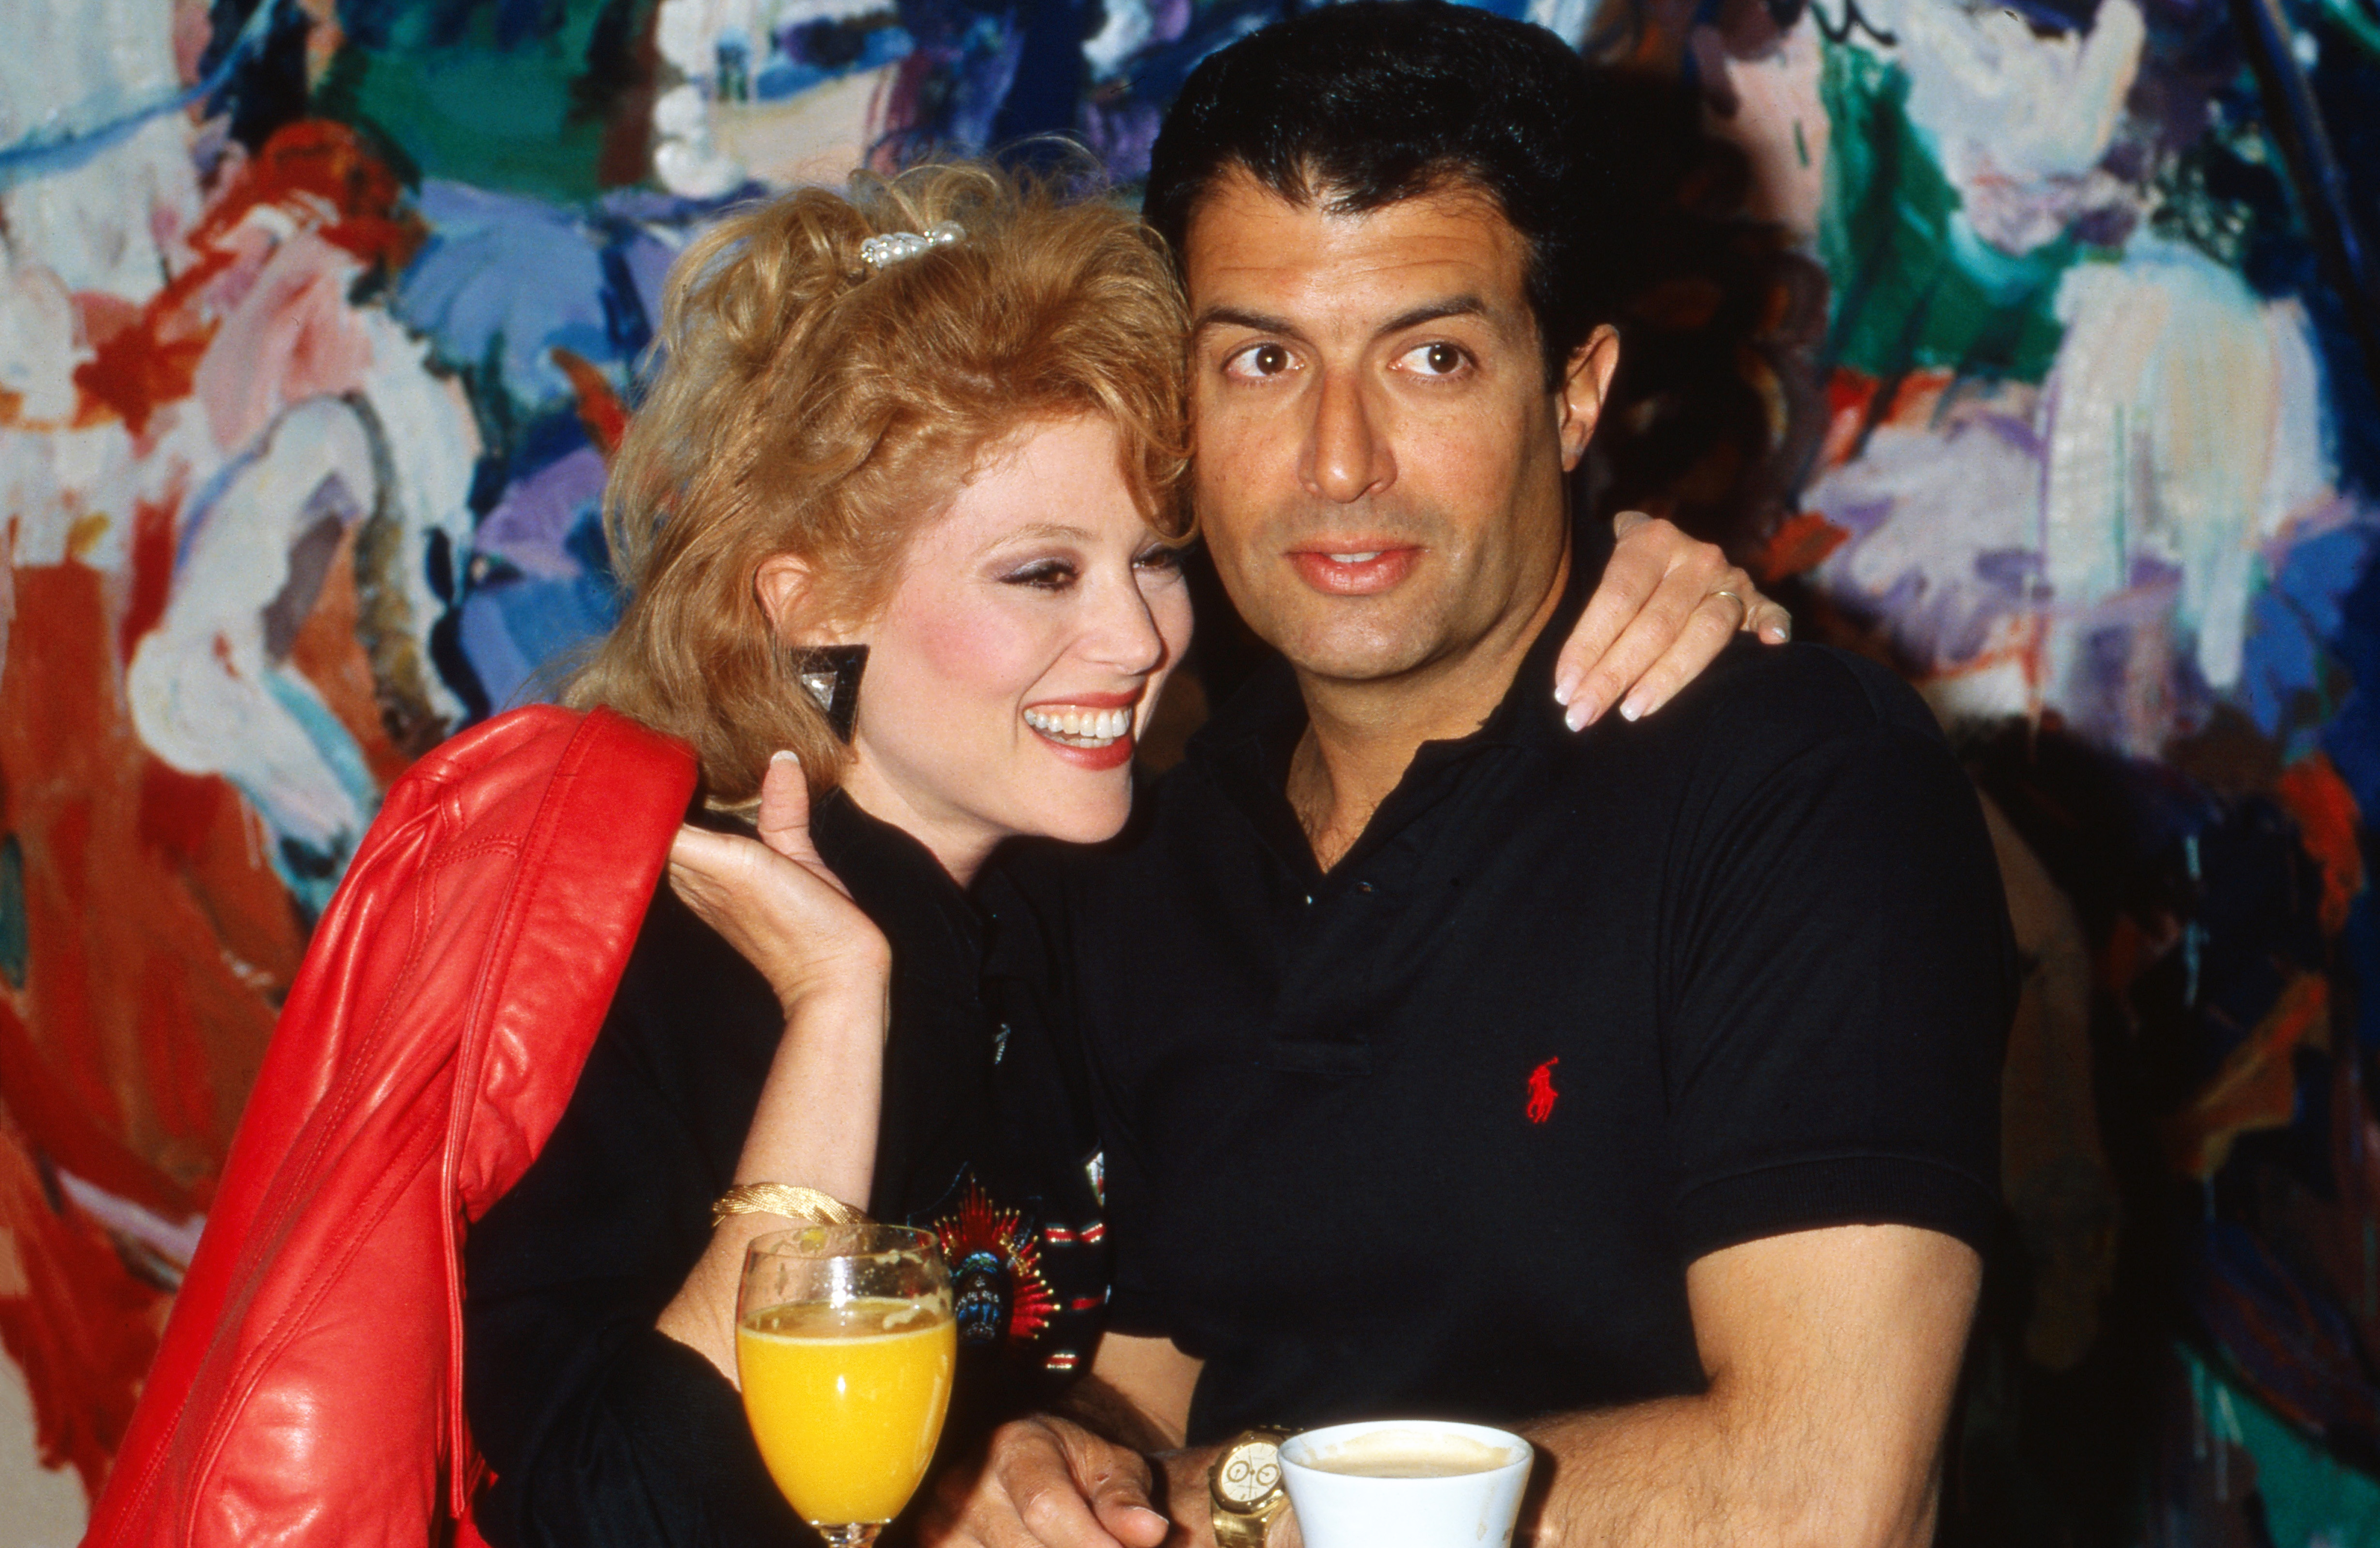 Audrey Landers and Donald Berkowitz an event in Hamburg, 1988 | Source: Getty Images